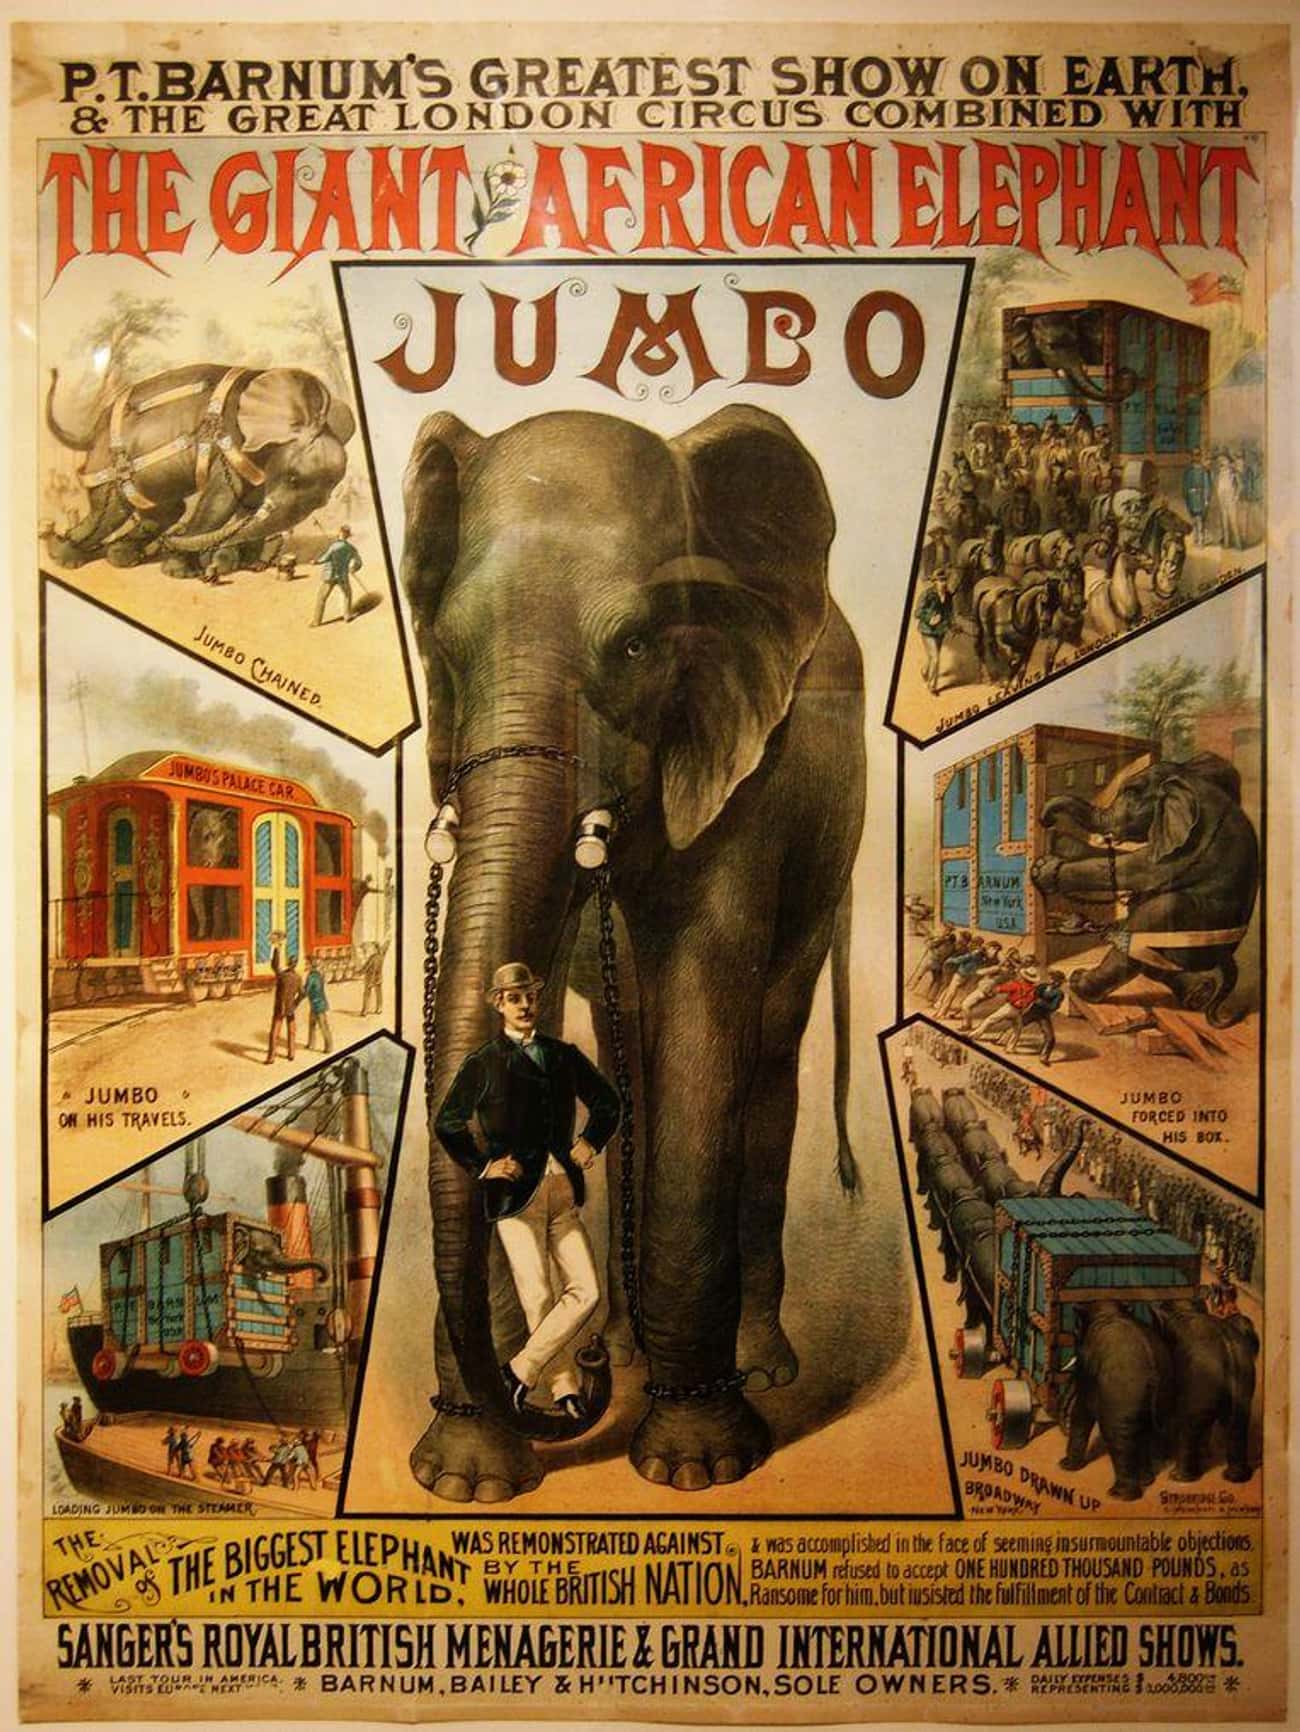 Jumbo Was - And Still Is - The Heart Of The Barnum & Bailey Circus